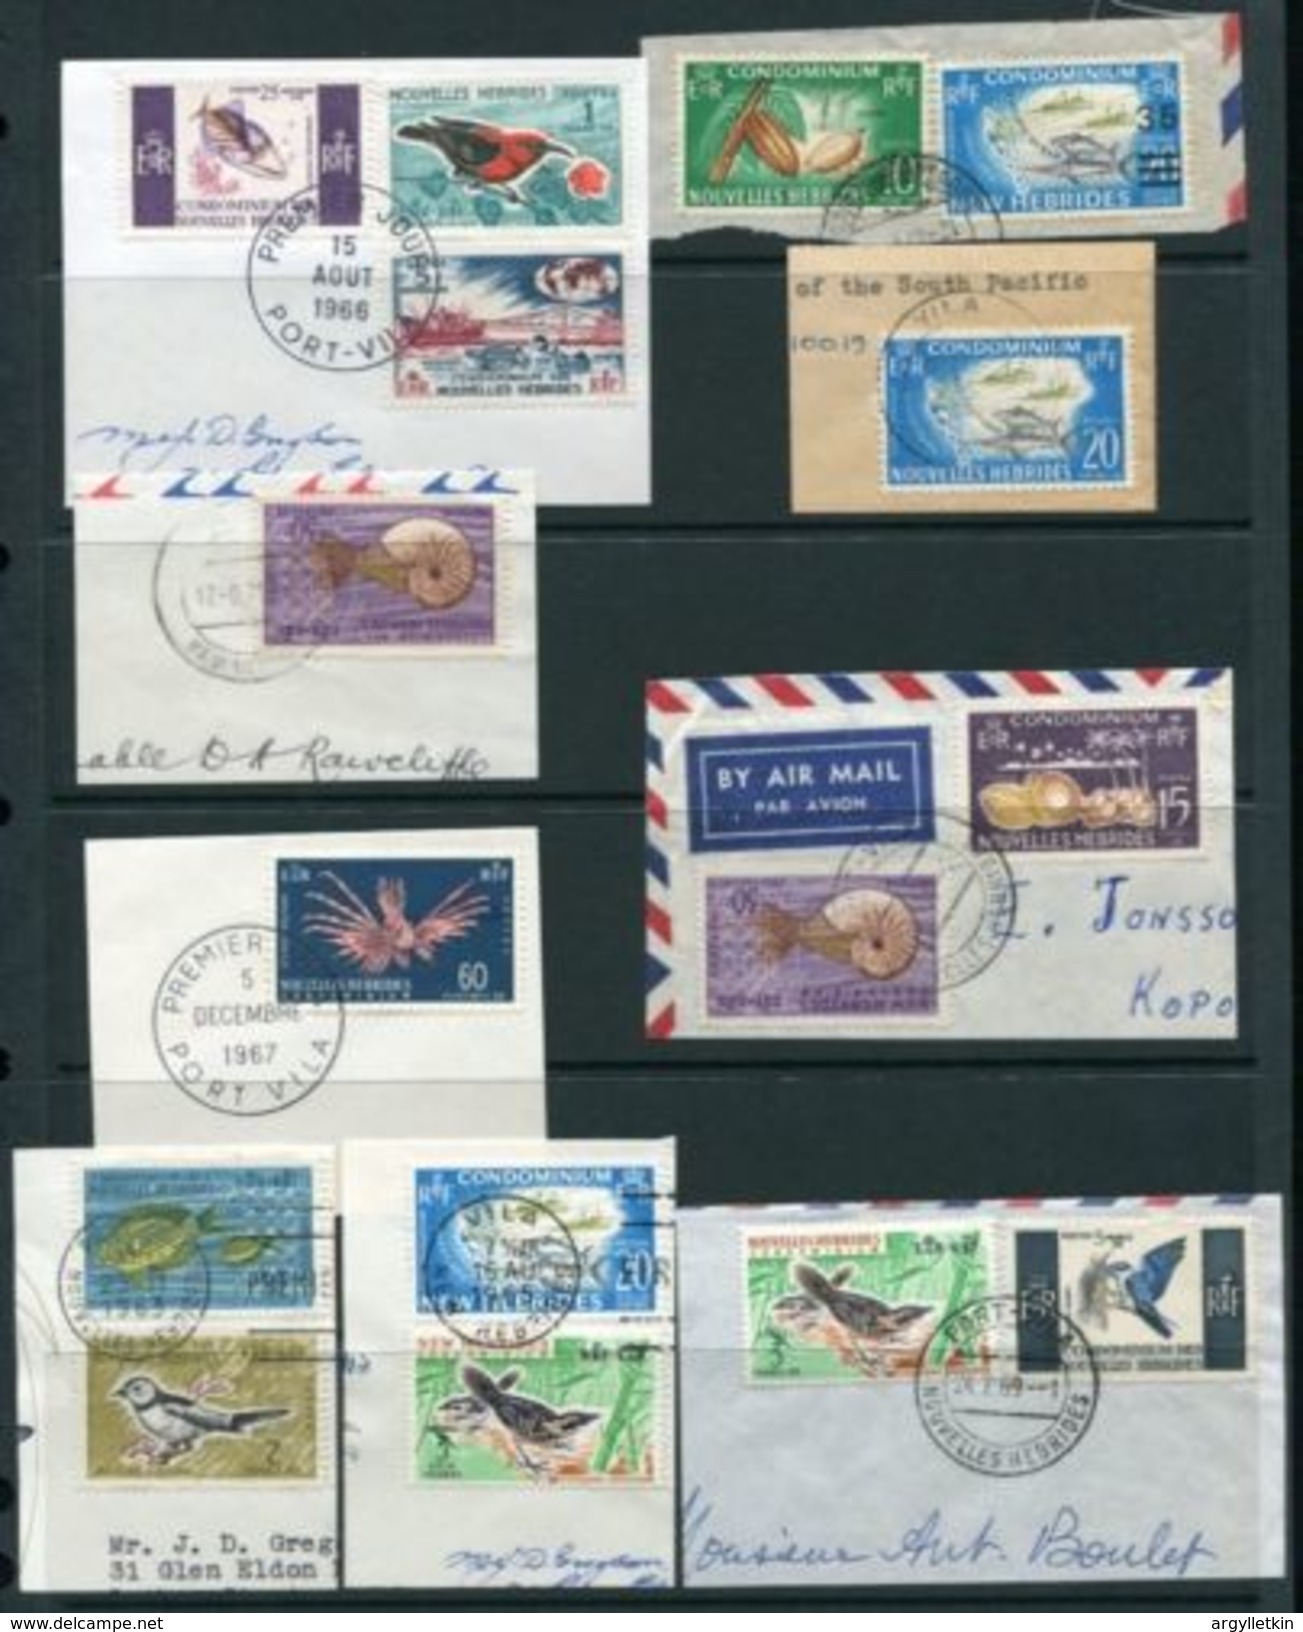 FRENCH NEW HEBRIDES 1963 SET FINE USED FISH BIRDS - Used Stamps